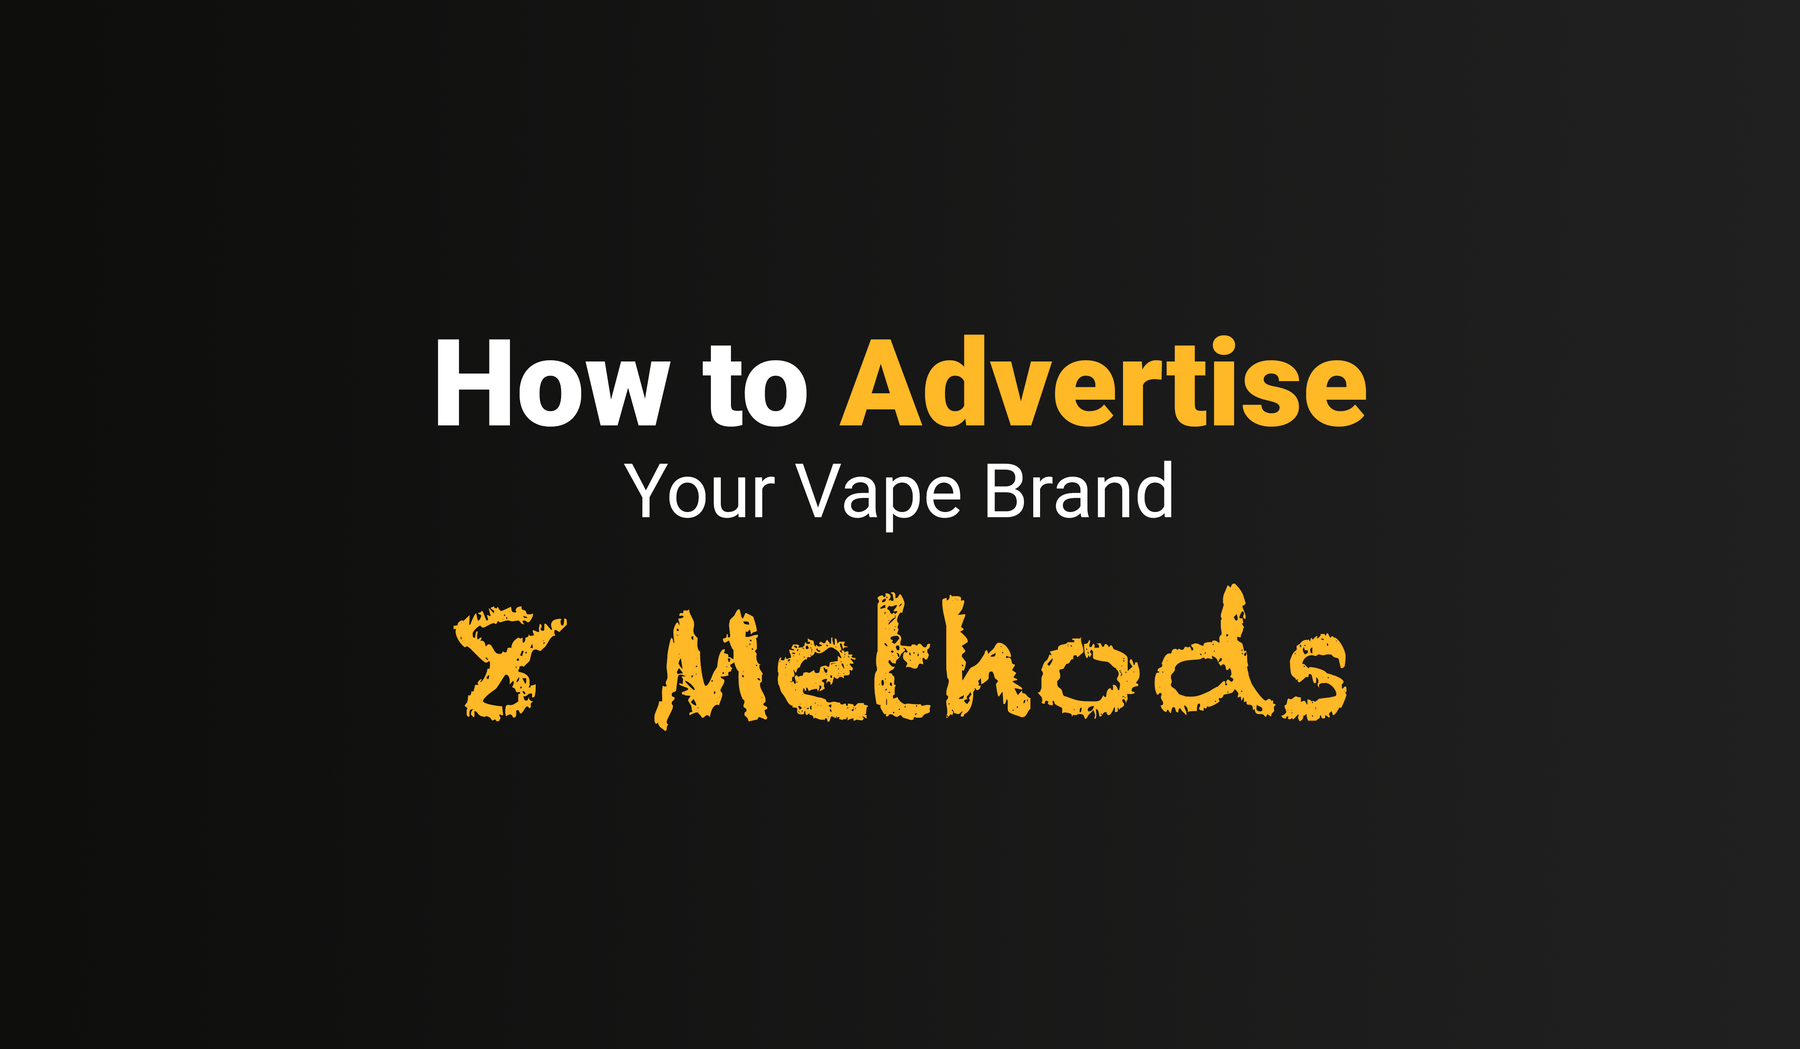 8 Effective Ways to Advertise Your Vape Brand